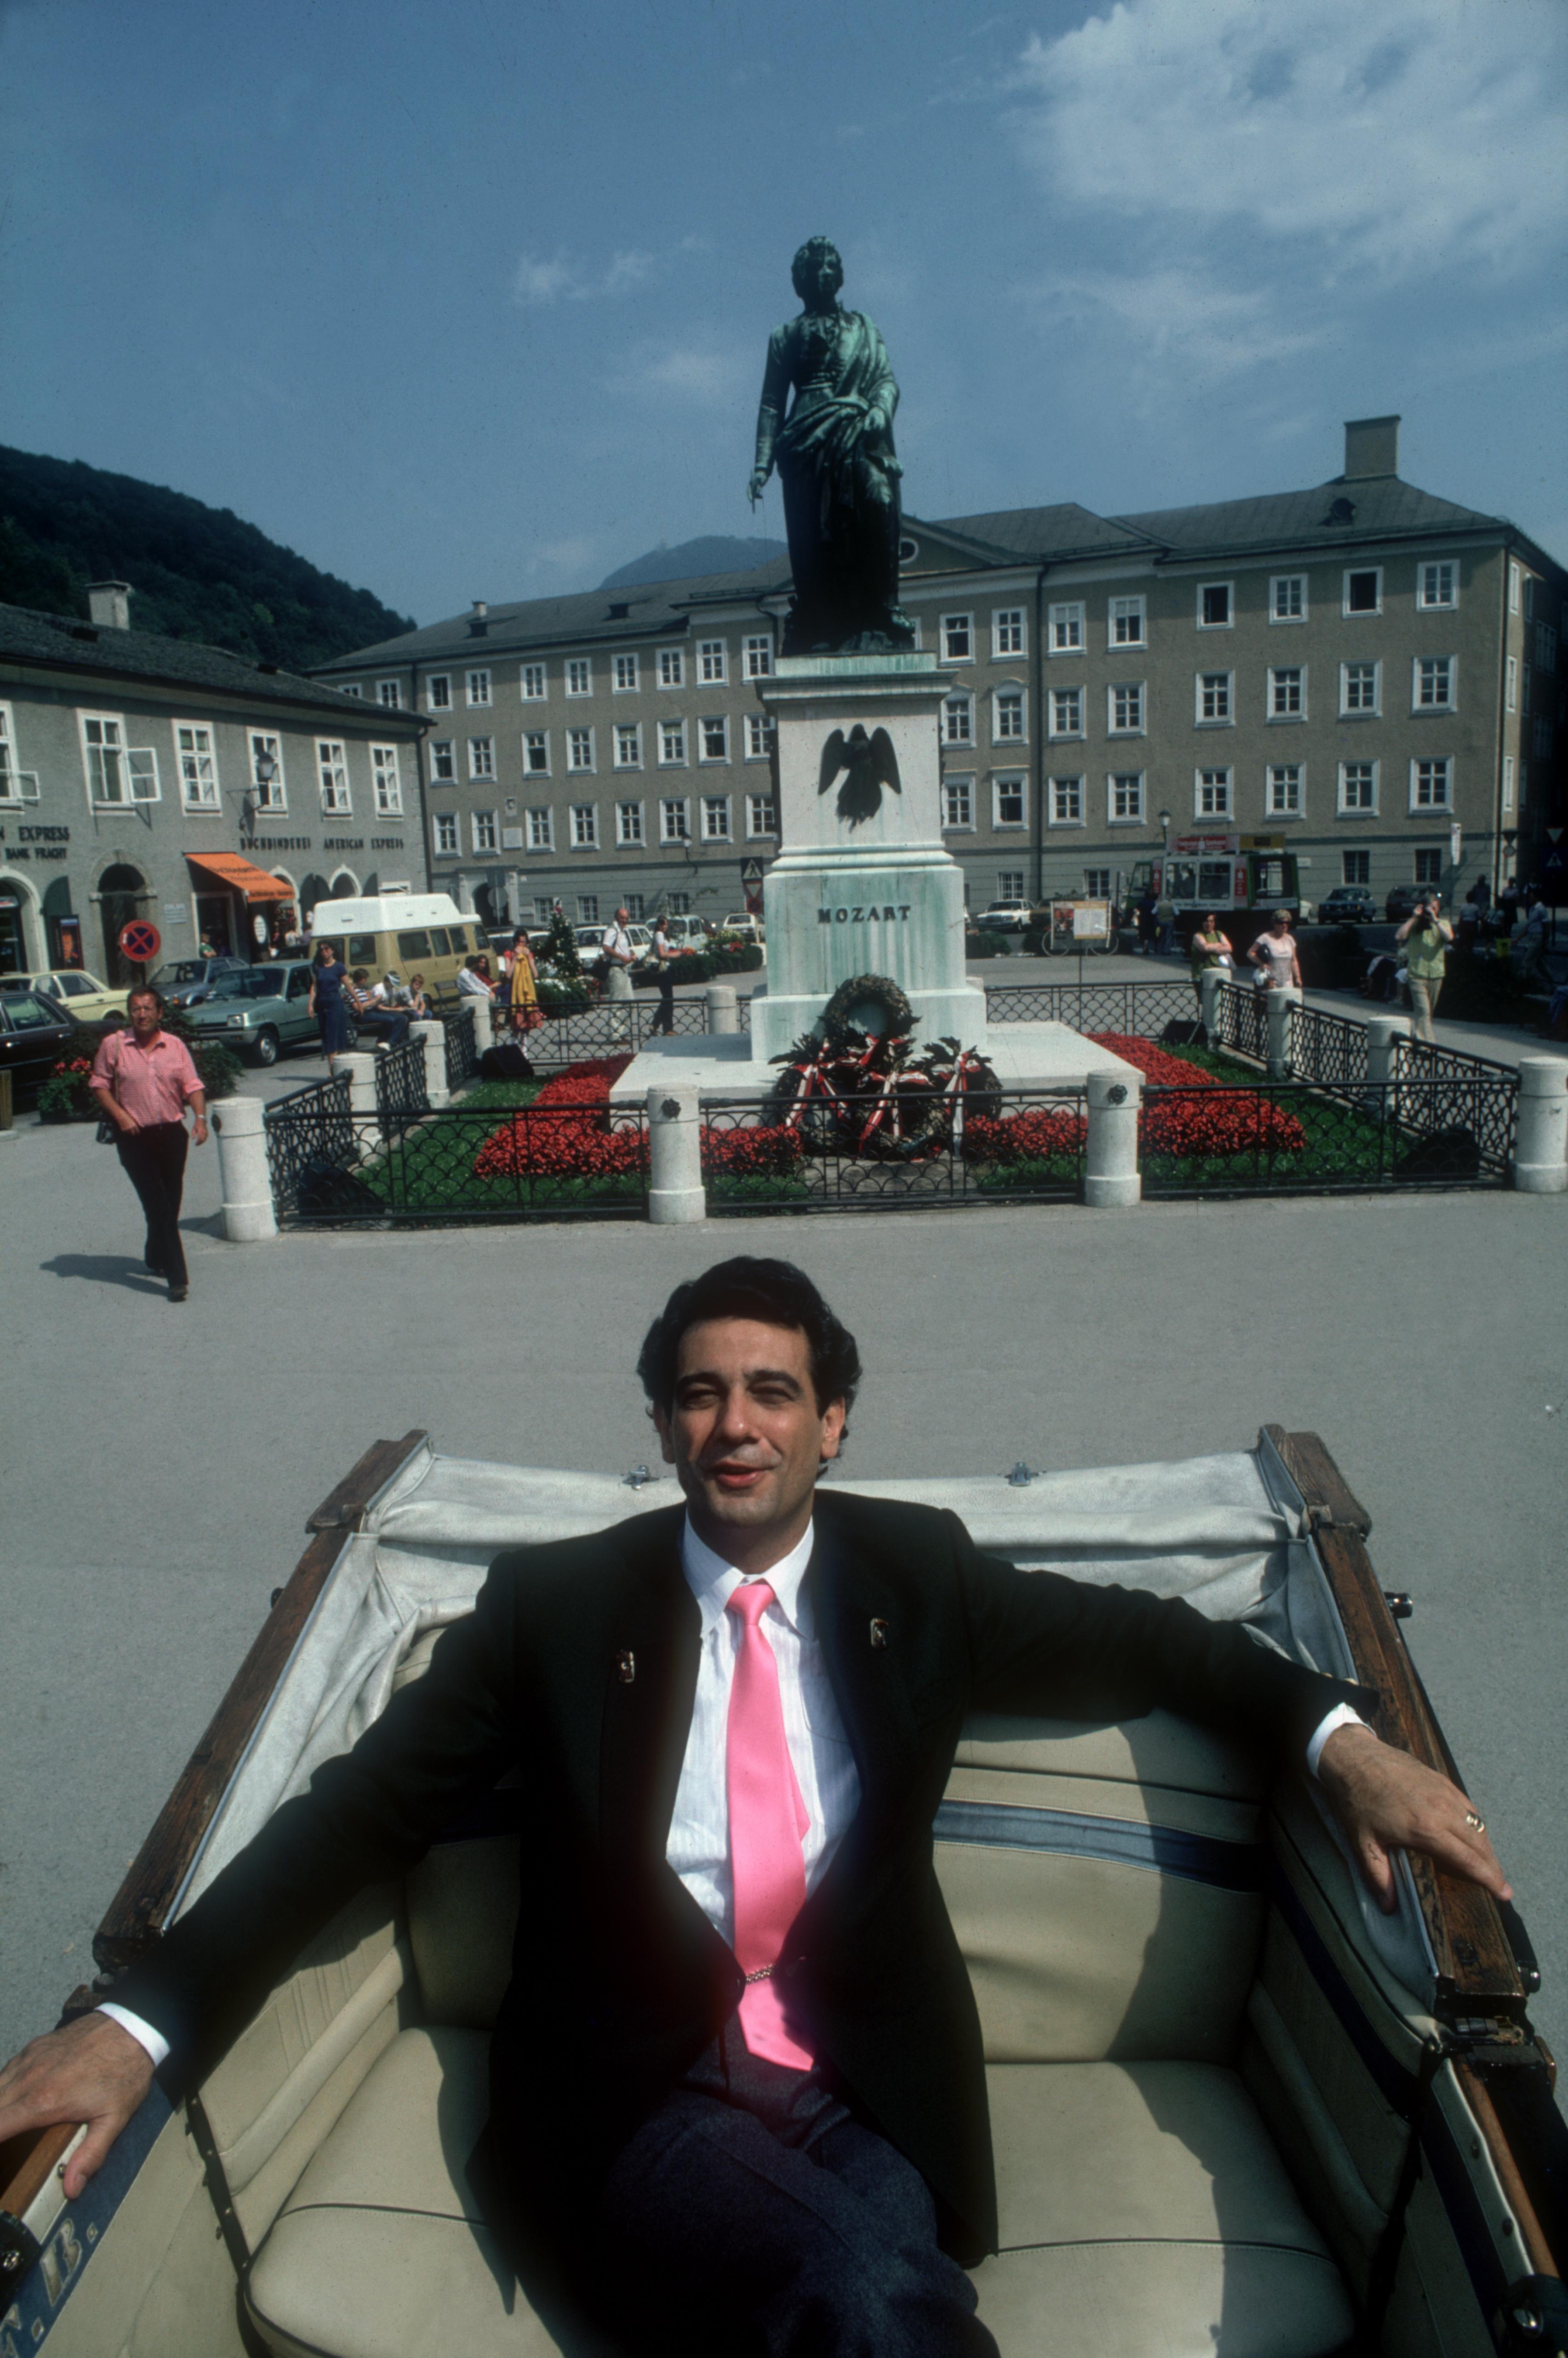 Spanish tenor Placido Domingo in the back of a car at Mozartplatz in Salzburg, in front of the Mozart memorial, August 1981.

Slim Aarons Estate Edition, Certificate of Authenticity included
Numbered and stamped by the Slim Aarons Estate

Modern